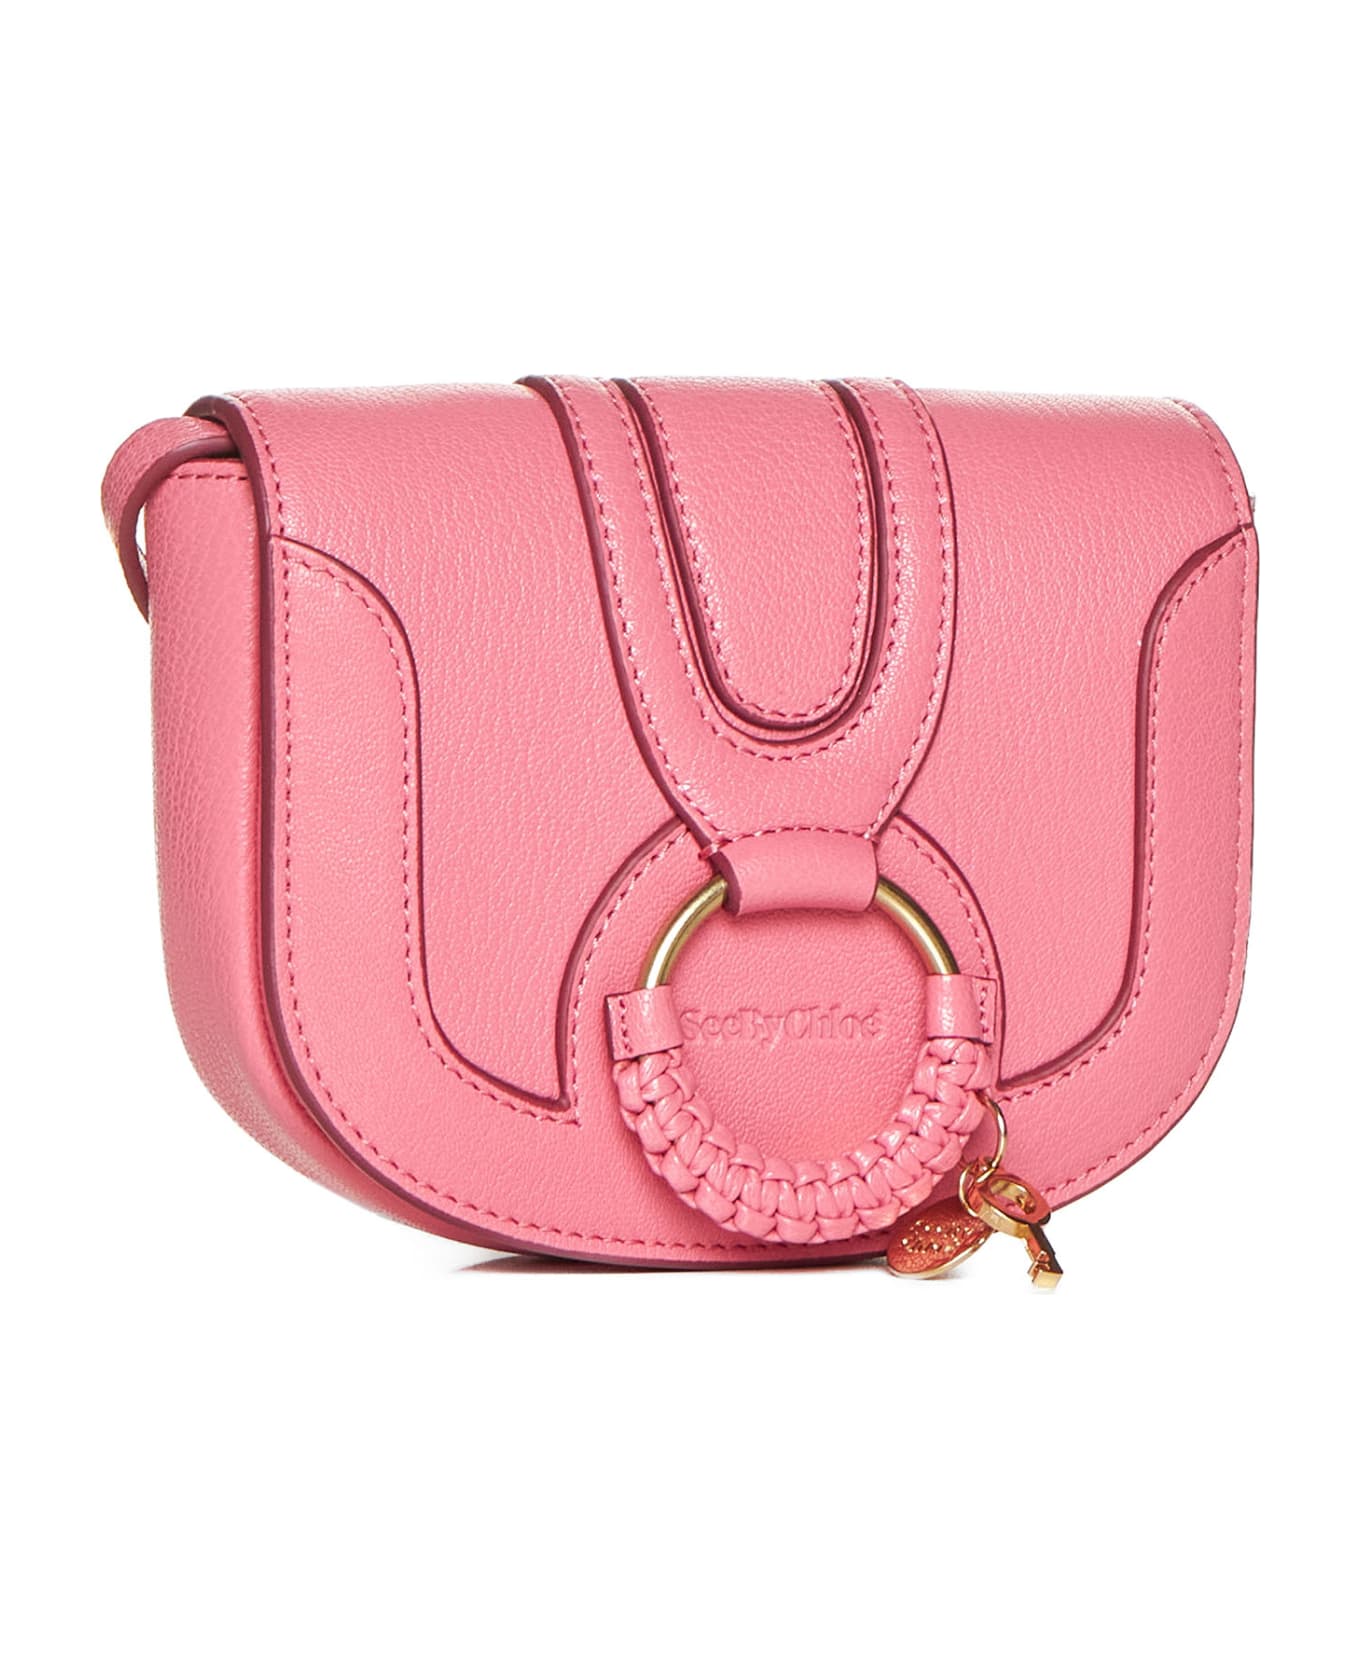 See by Chloé Shoulder Bag - Pushy pink トートバッグ